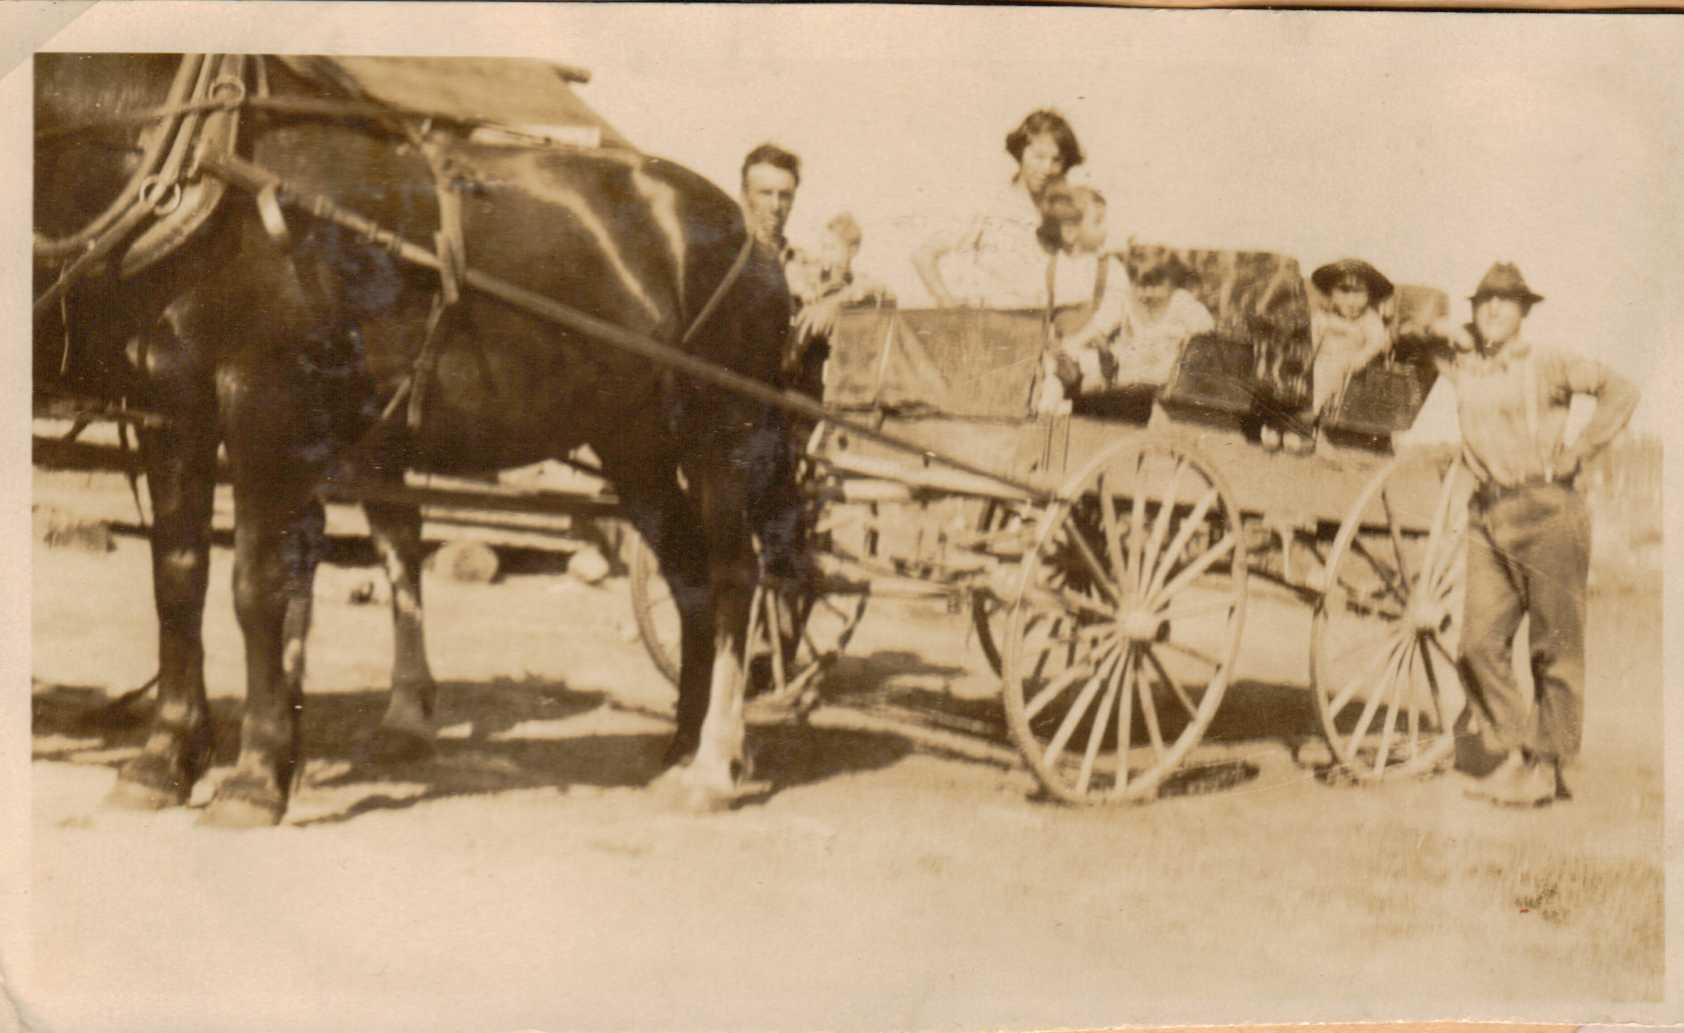 Hubert and Doris Brooks in Horse Drawn Wagon with Family Members